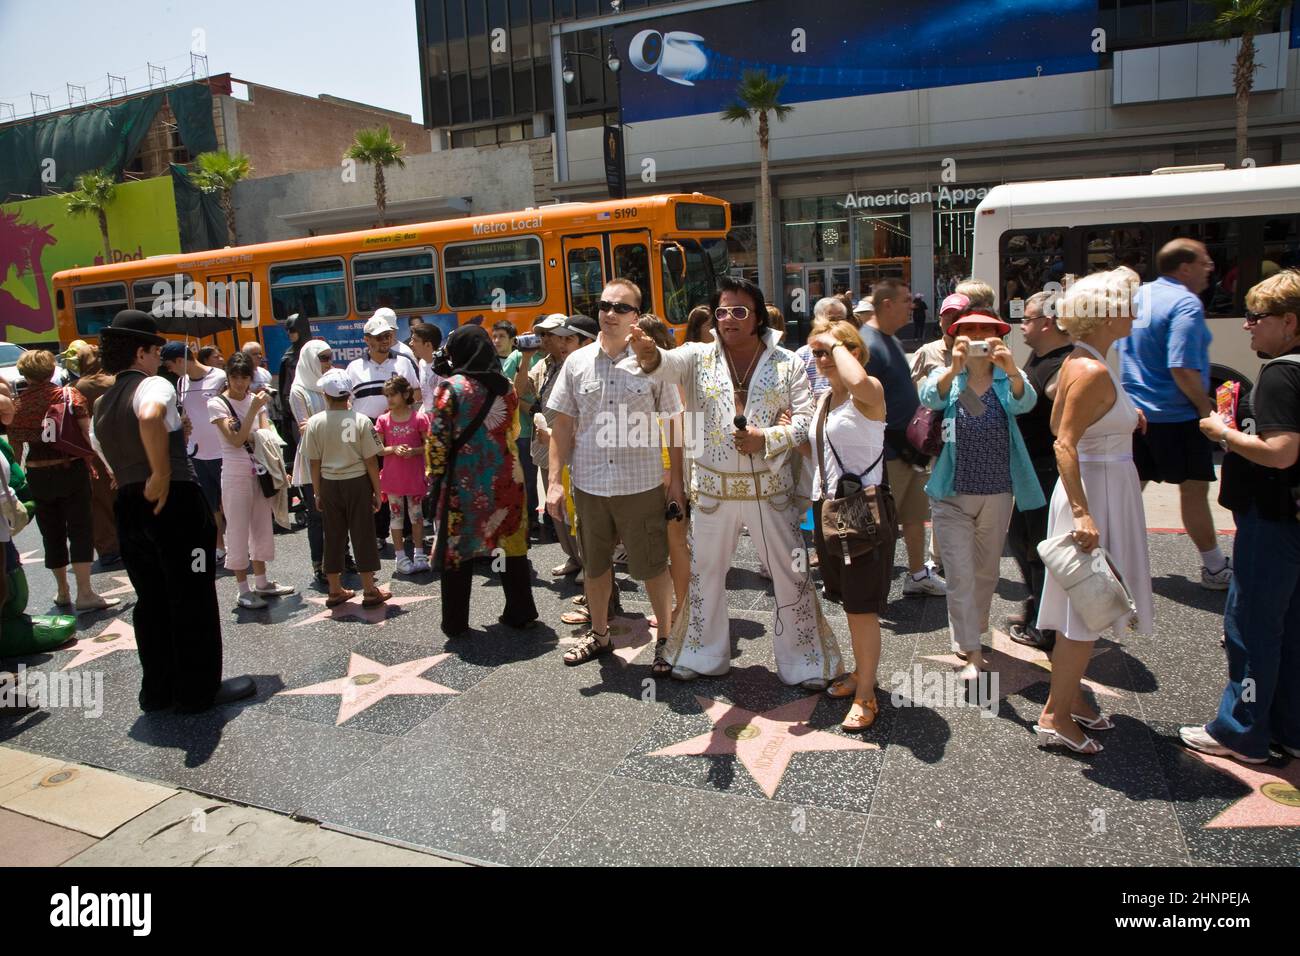 actors are dressed as Hollywood doubles and offer Photos with tourists for money Stock Photo